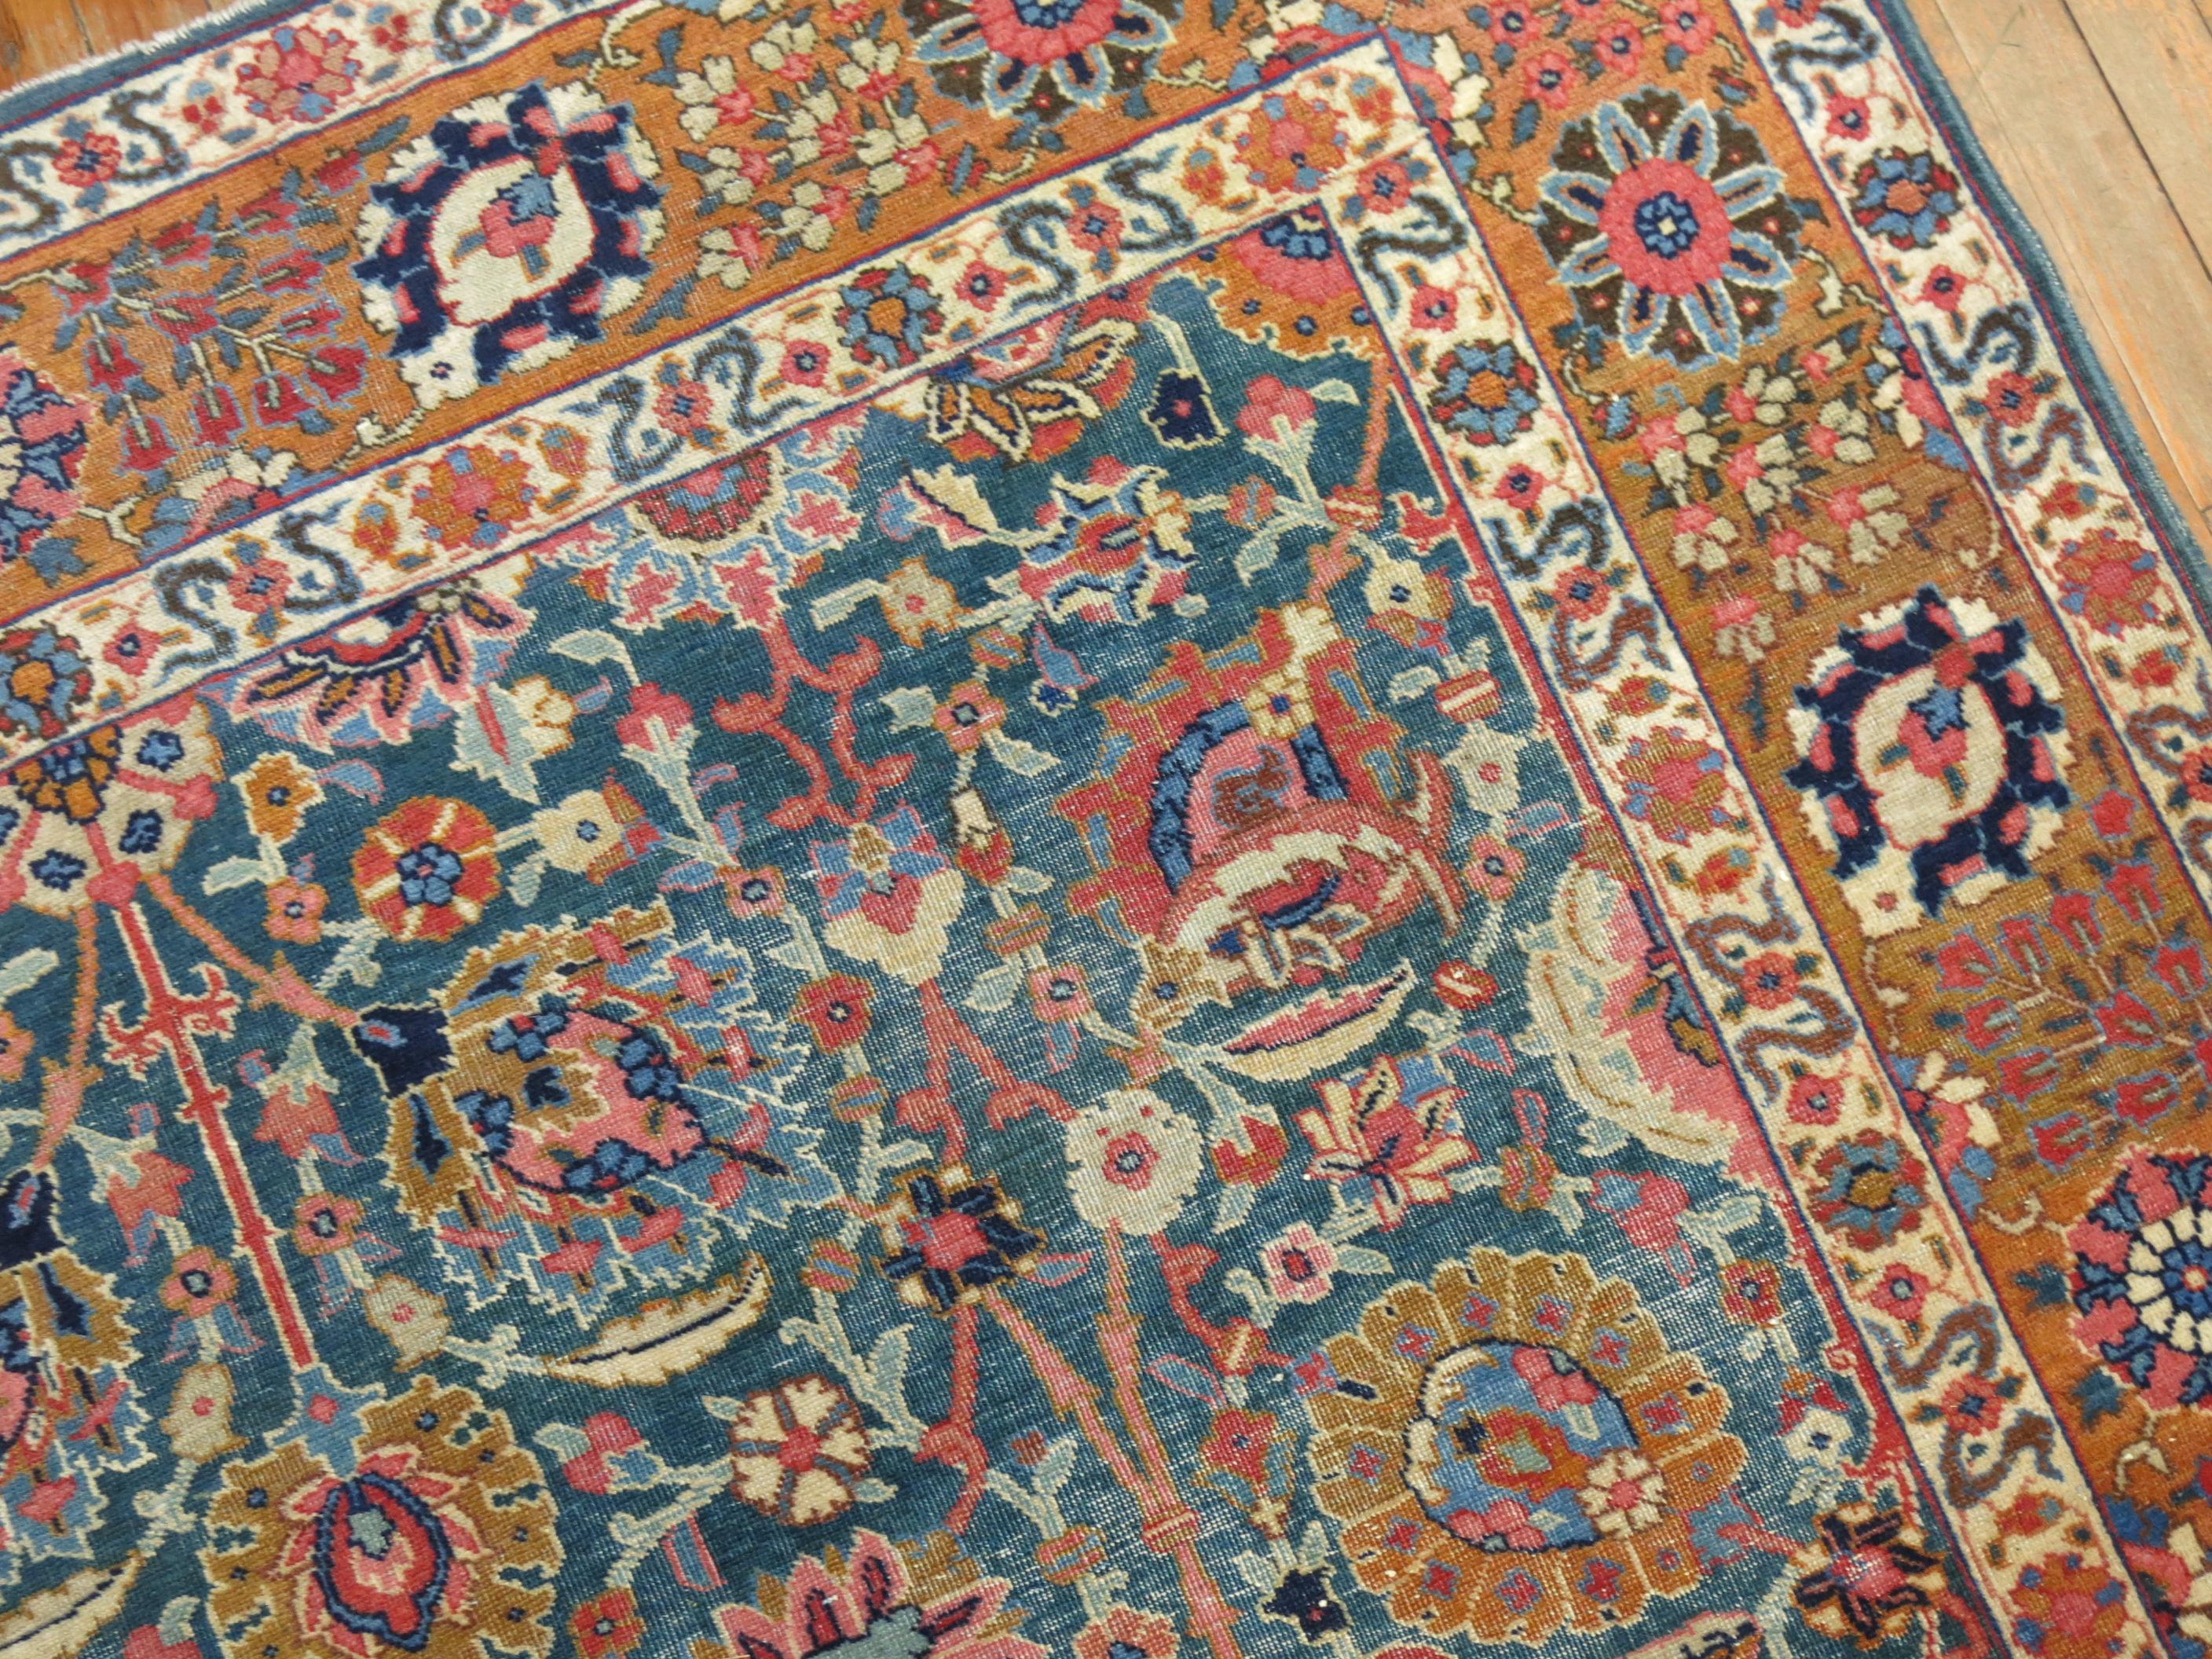 Hand-Woven Blue Pink Traditional Persian Tabriz Rug